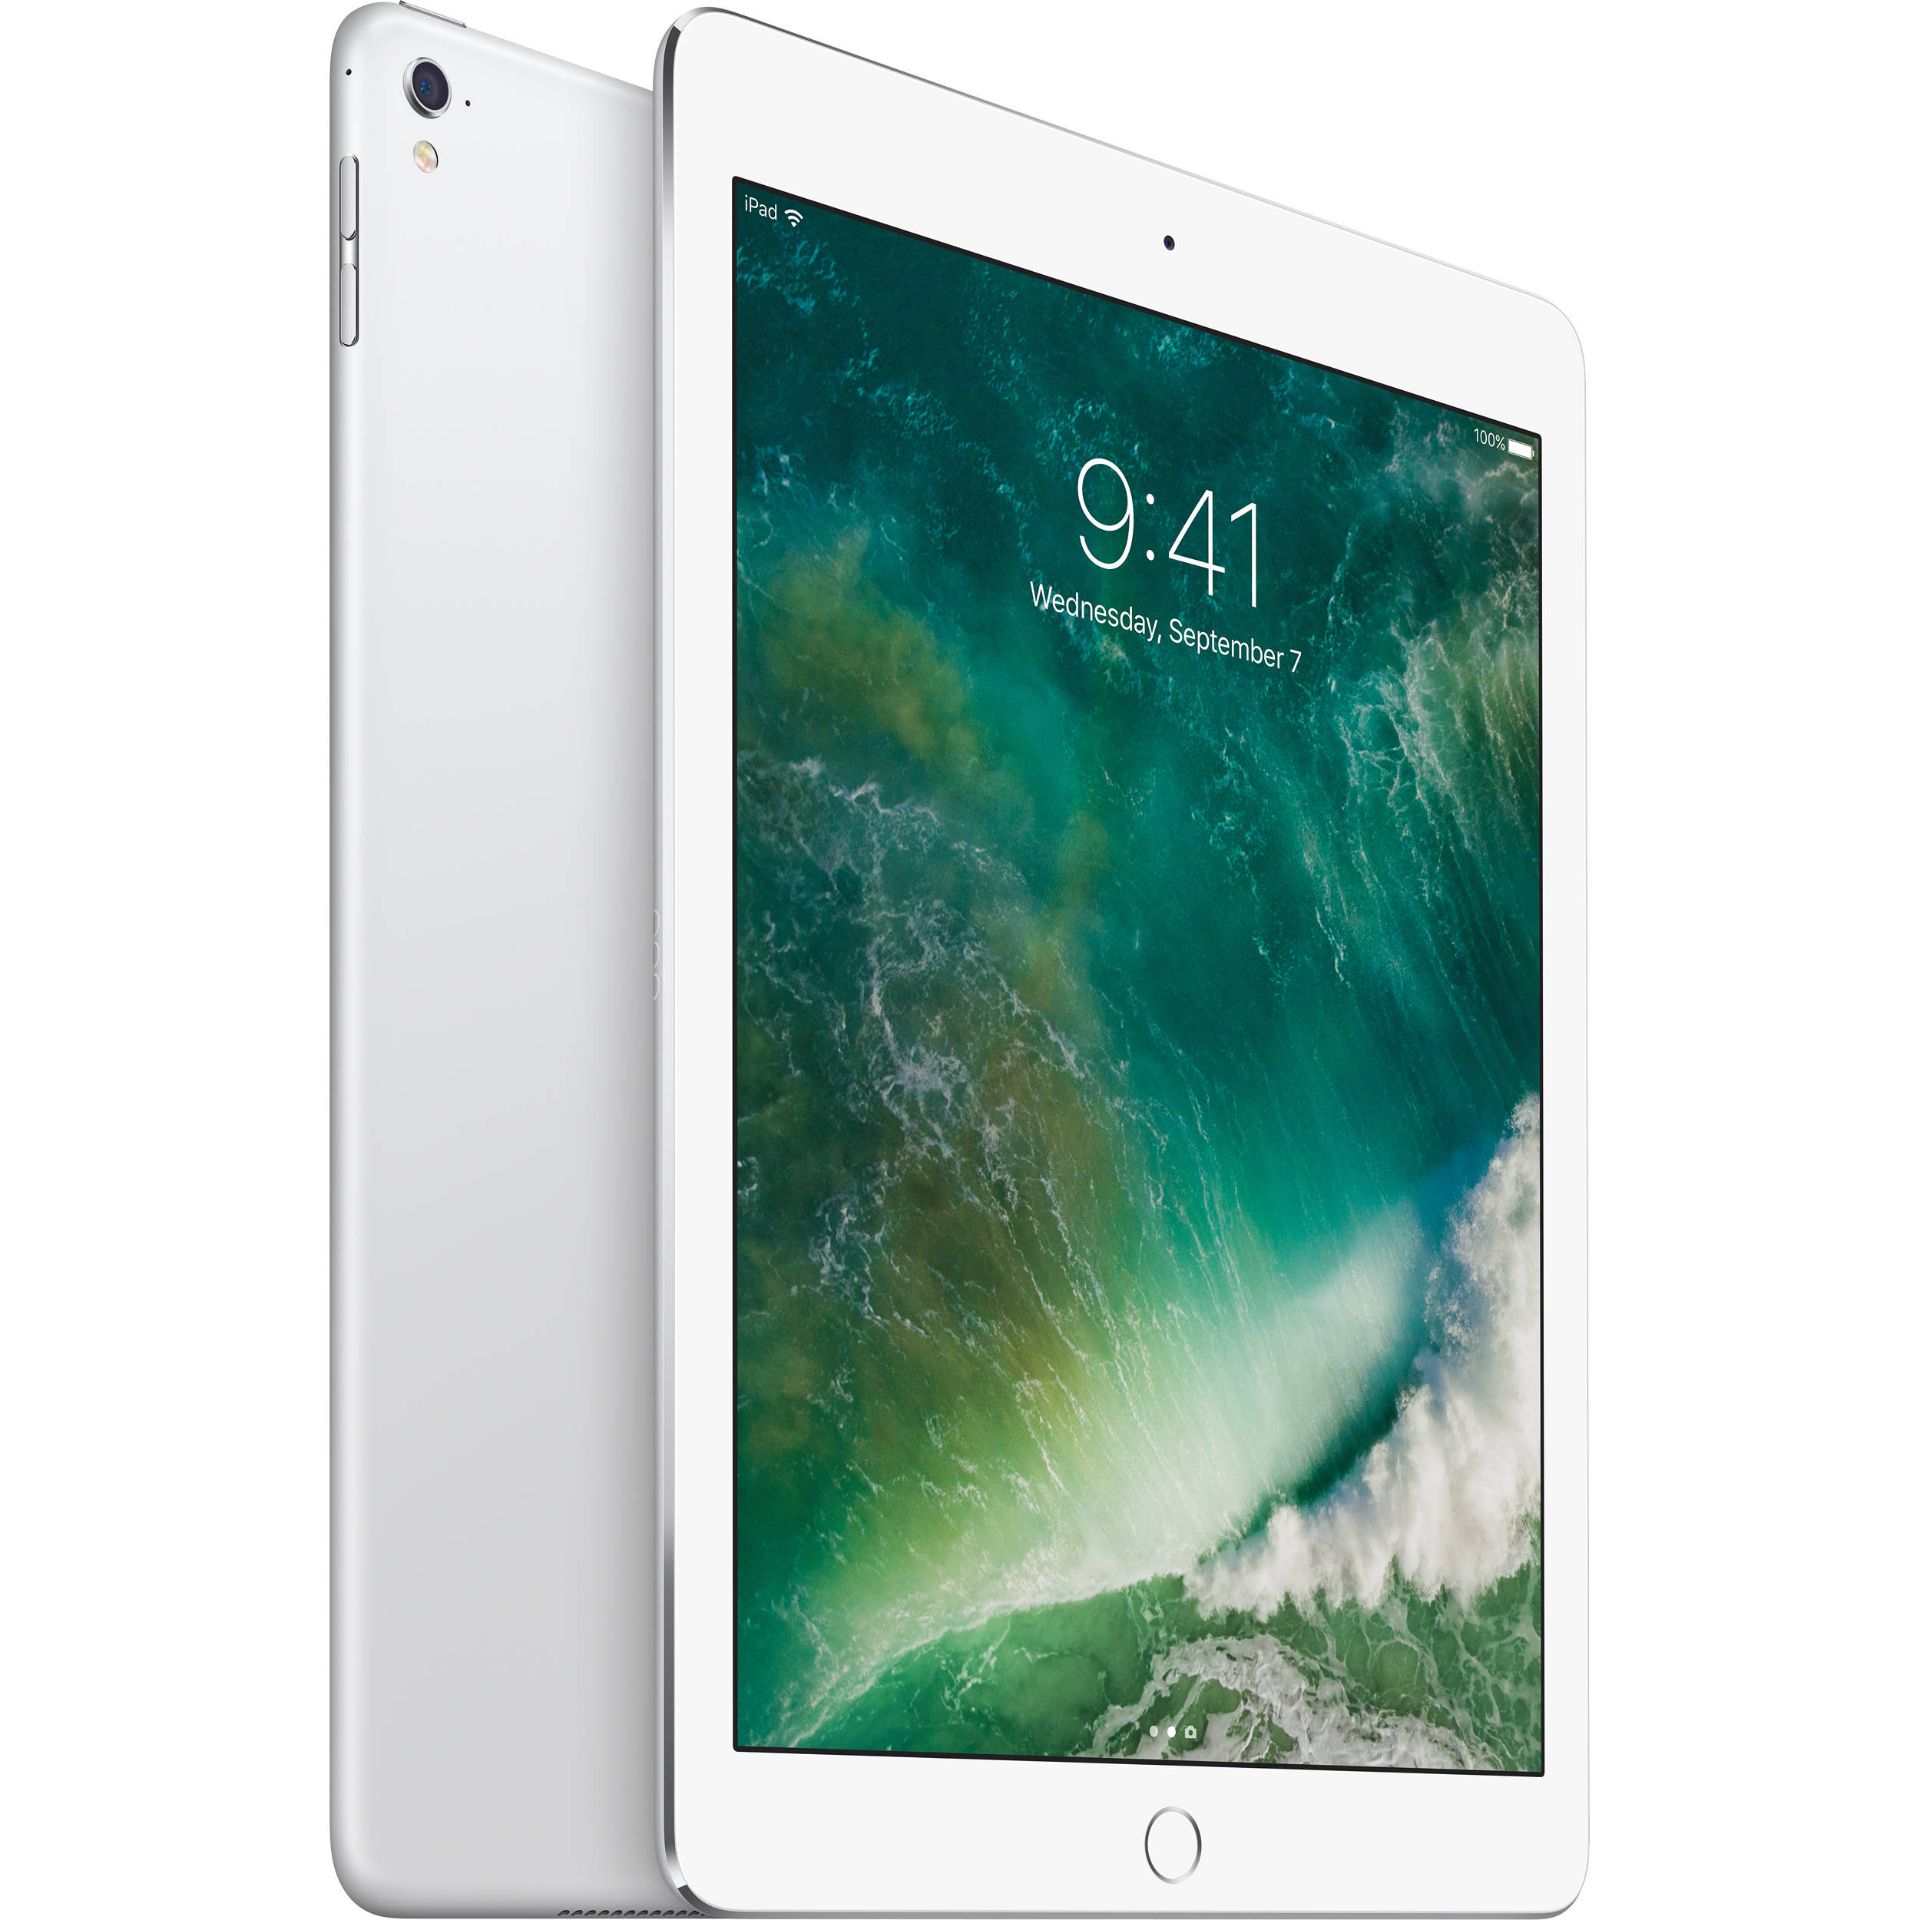 V Grade A Apple iPad Pro 9" Silver 32GB - Wi-Fi Only - with accessories and original box X 2 YOUR